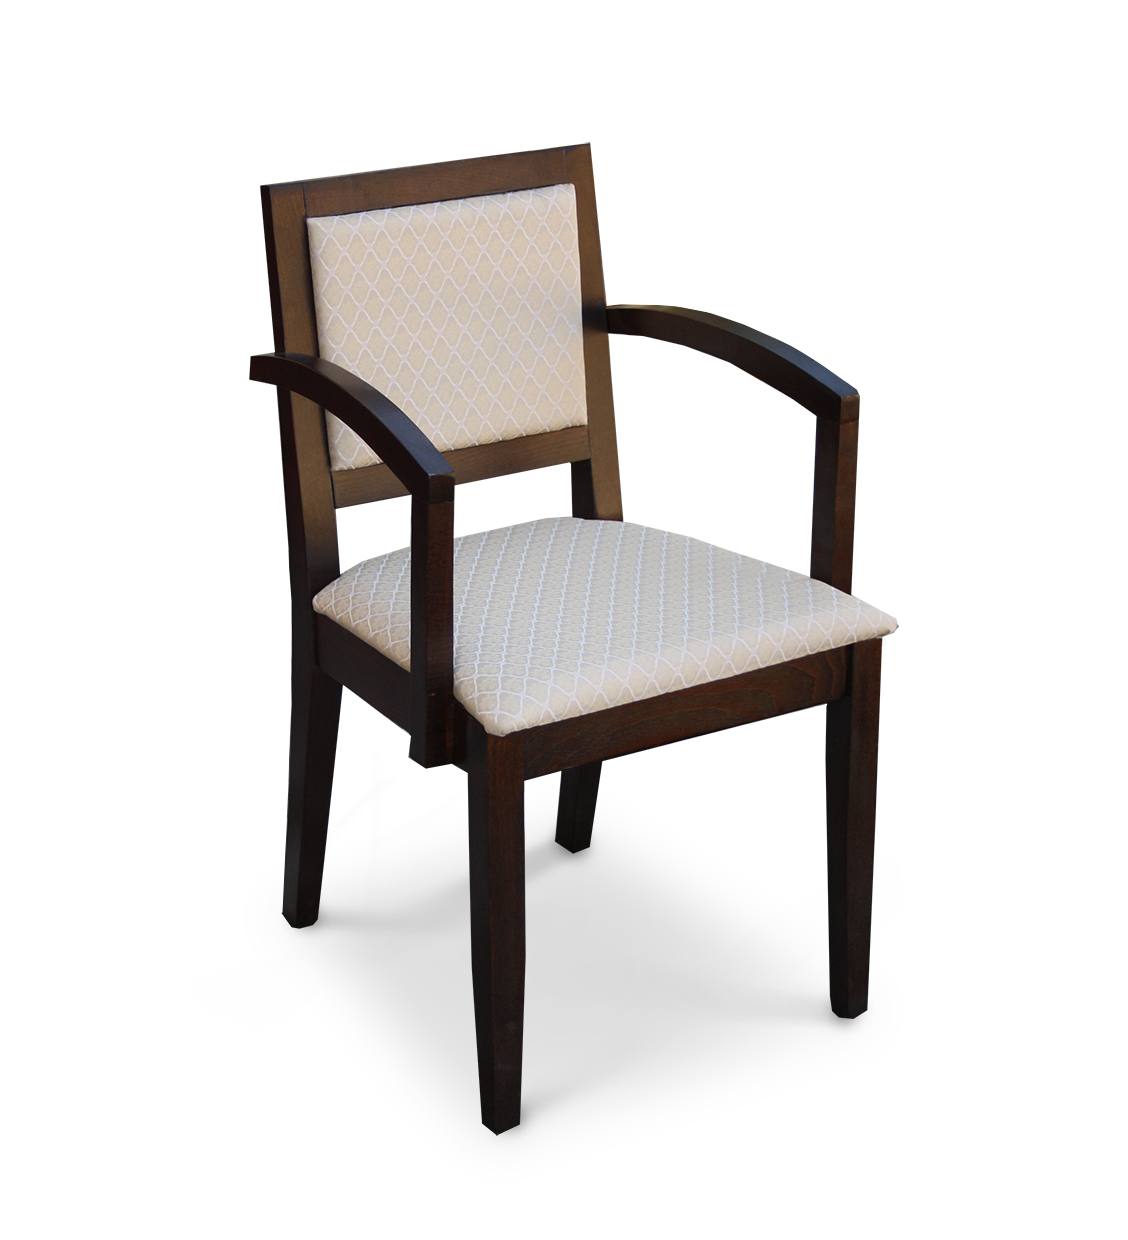 Adrien chair with arms